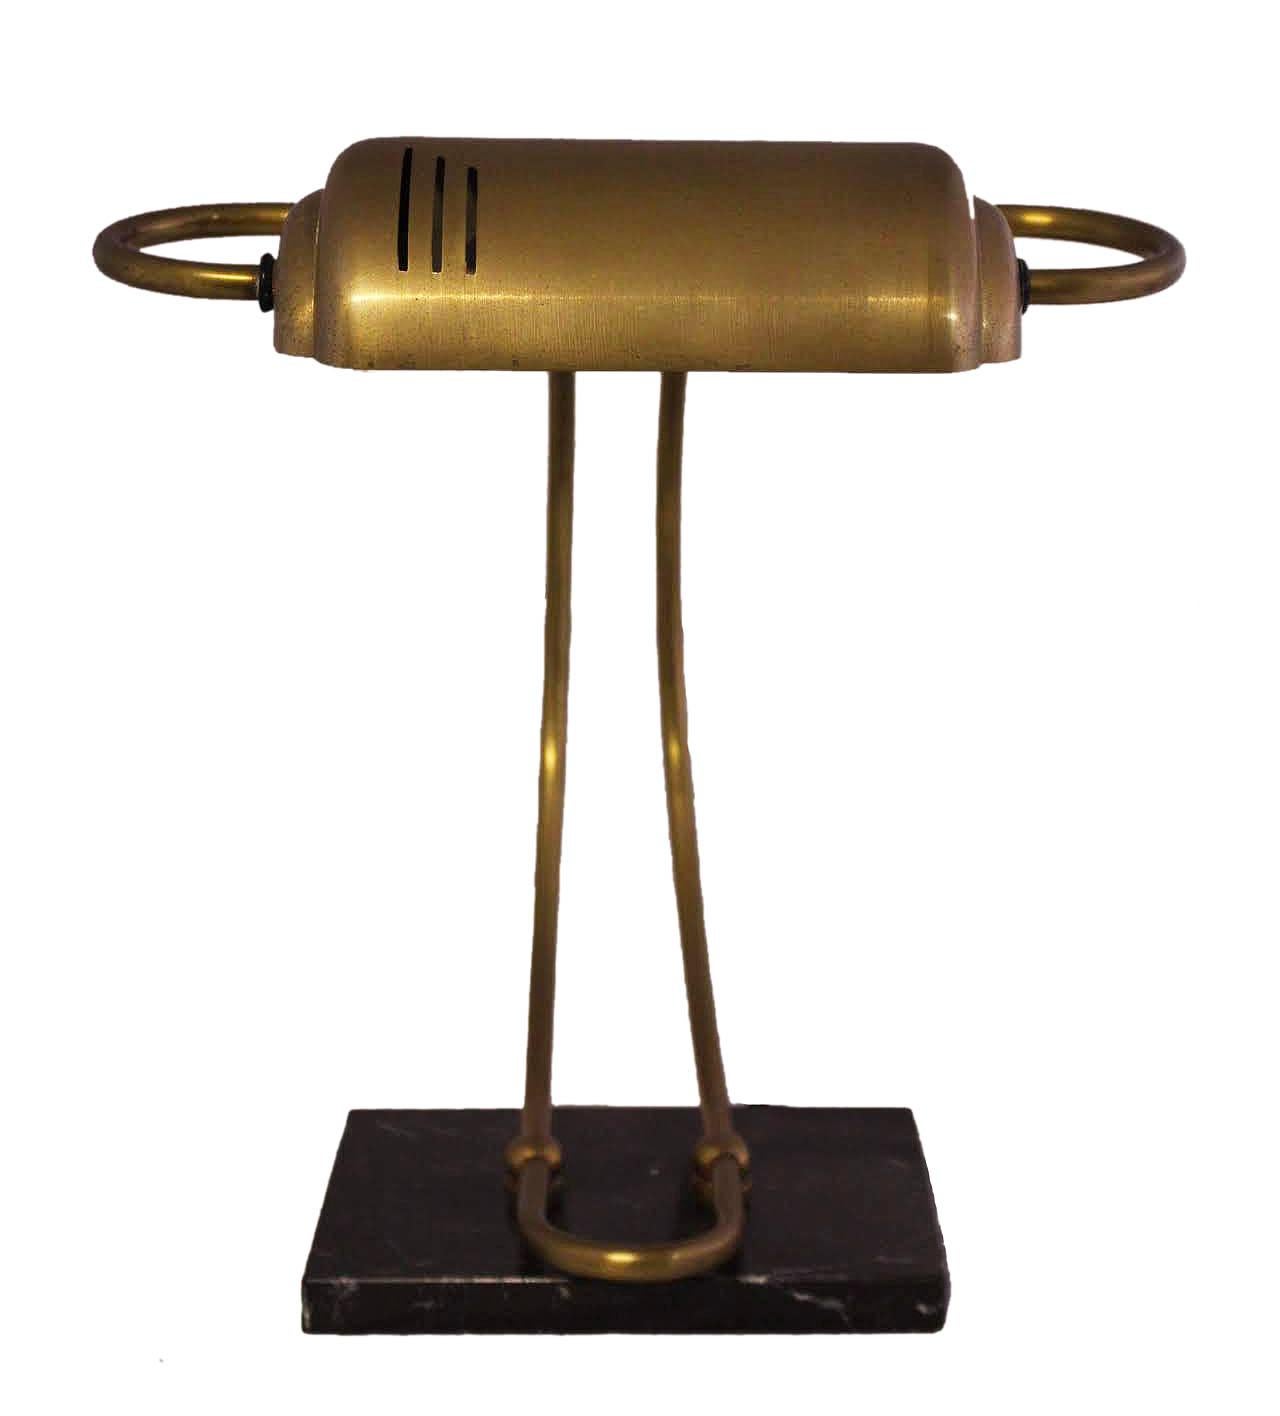 Desk light table lamp midcentury
Good quality gilt bronze brass
Black marble with variegated white veins
Very good vintage condition. Wear consistent with age and use
This can be rewired to USA or EU and UK standards.